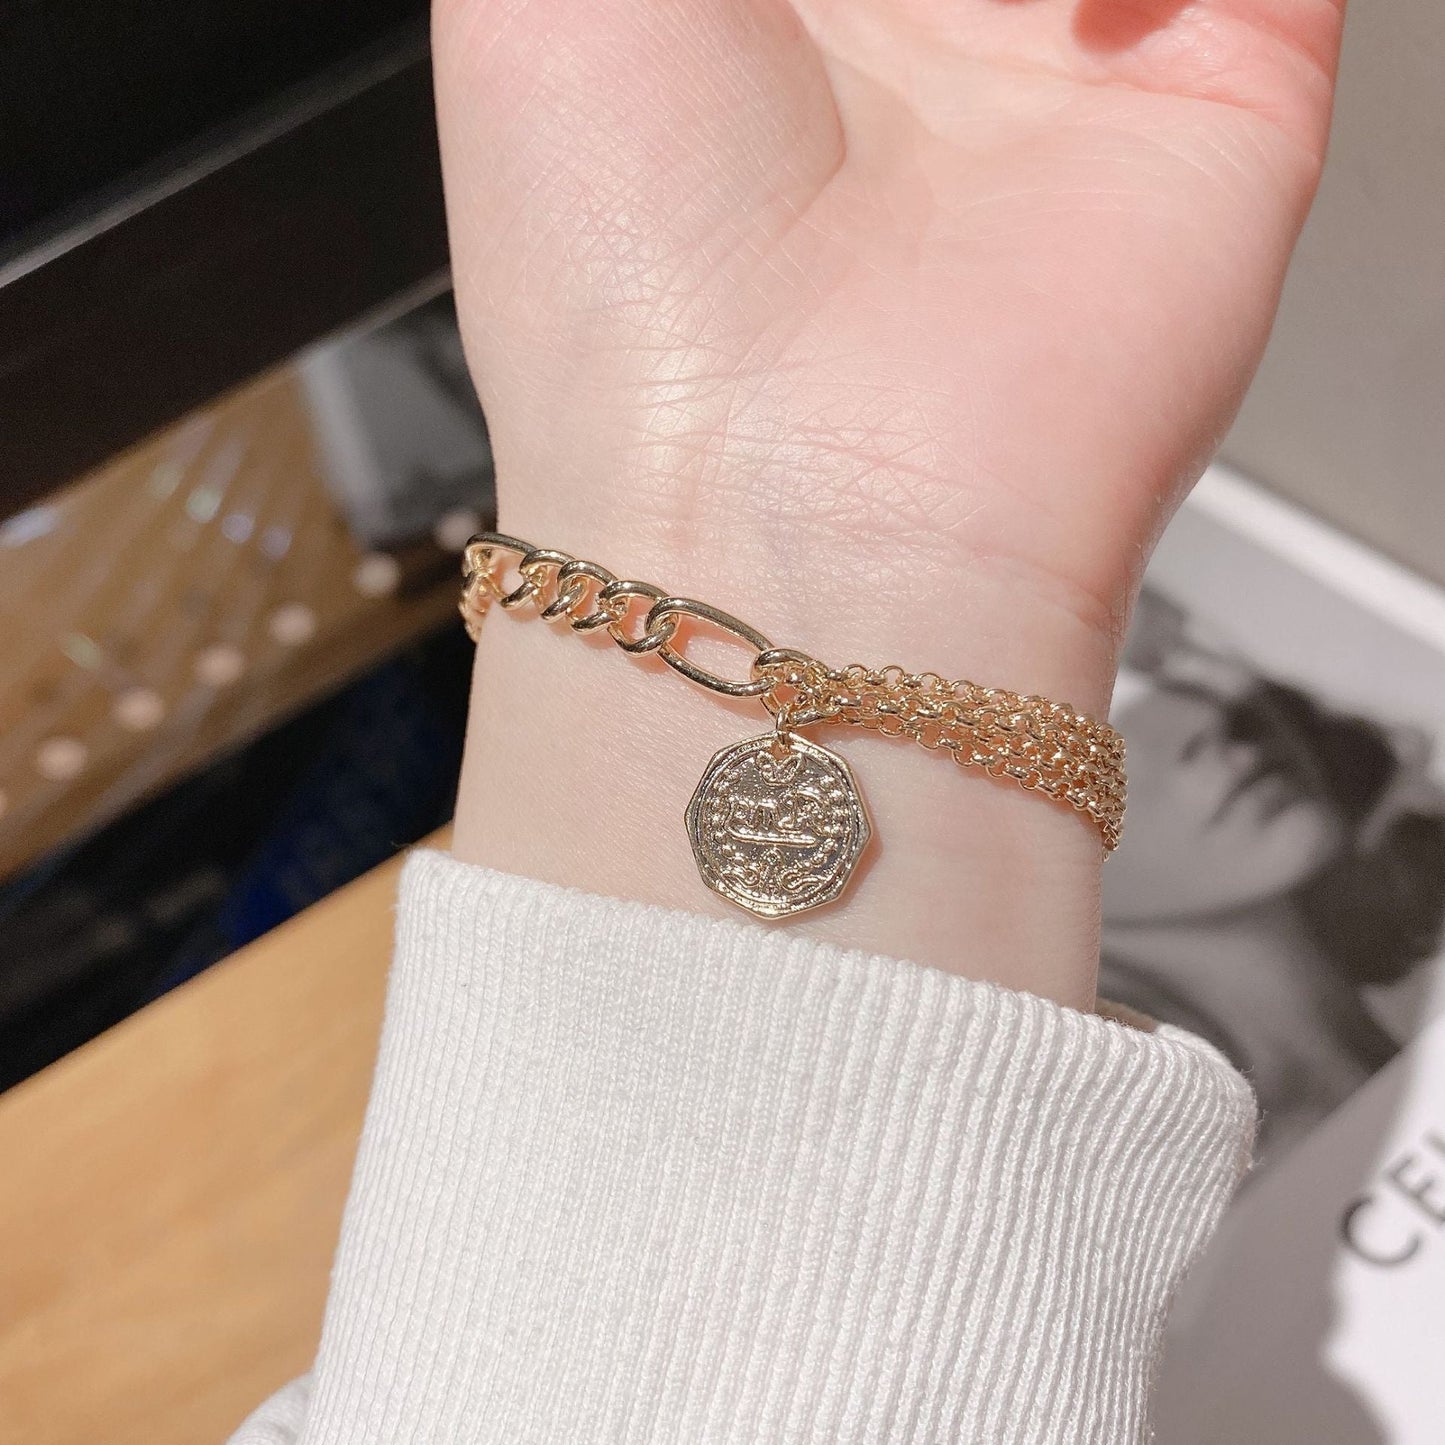 Asymmetrical Gold Chain Bracelet with Coin